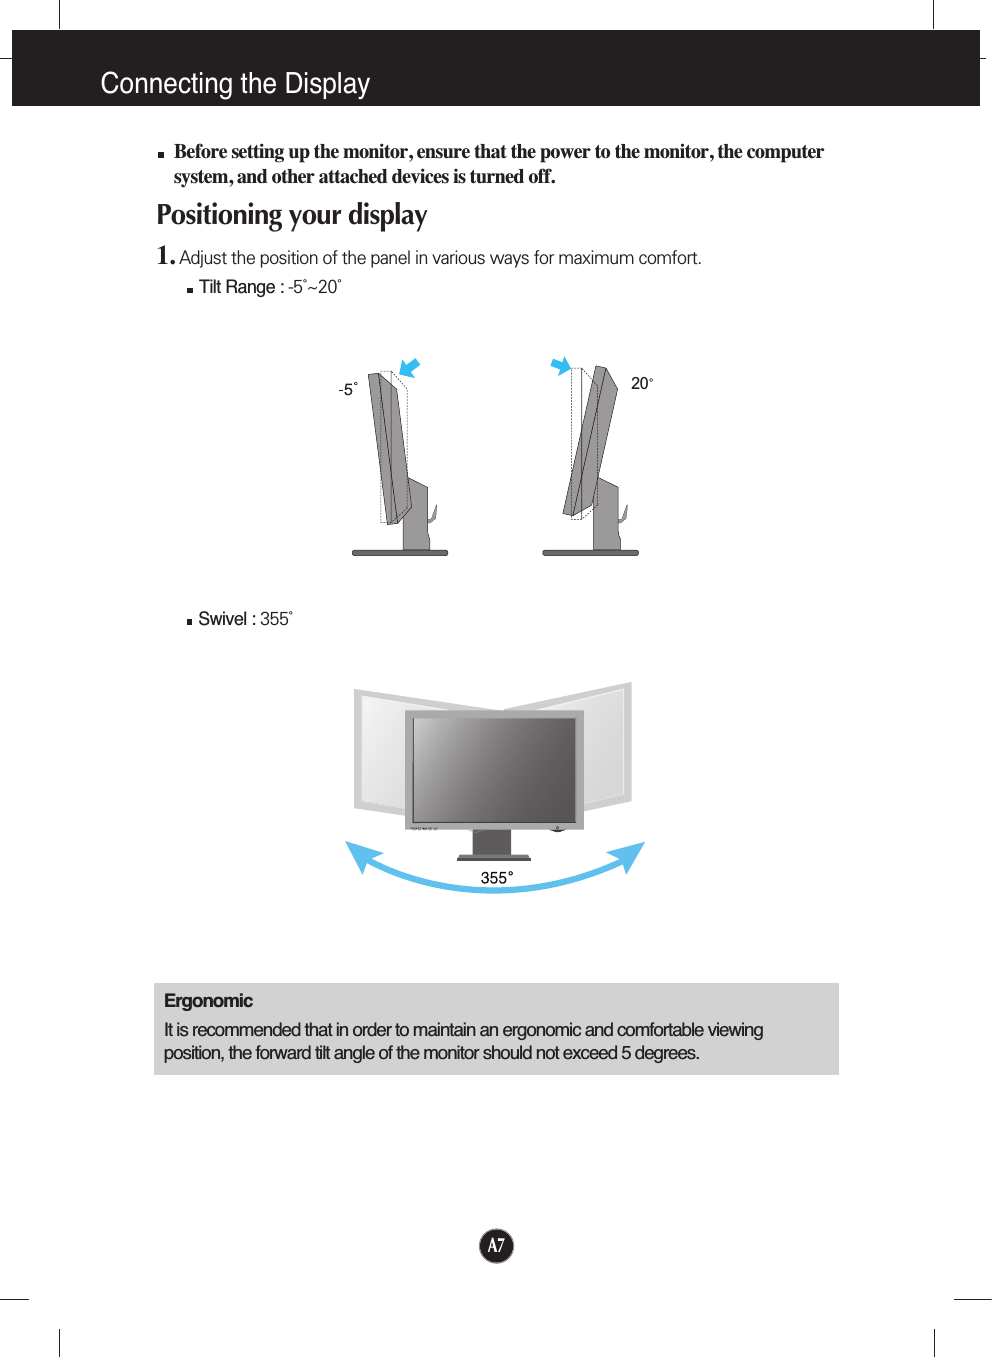 A7Connecting the Display20Before setting up the monitor, ensure that the power to the monitor, the computersystem, and other attached devices is turned off. Positioning your display1. Adjust the position of the panel in various ways for maximum comfort.Tilt Range : -5˚~20˚                            ErgonomicIt is recommended that in order to maintain an ergonomic and comfortable viewingposition, the forward tilt angle of the monitor should not exceed 5 degrees.Swivel : 355˚   